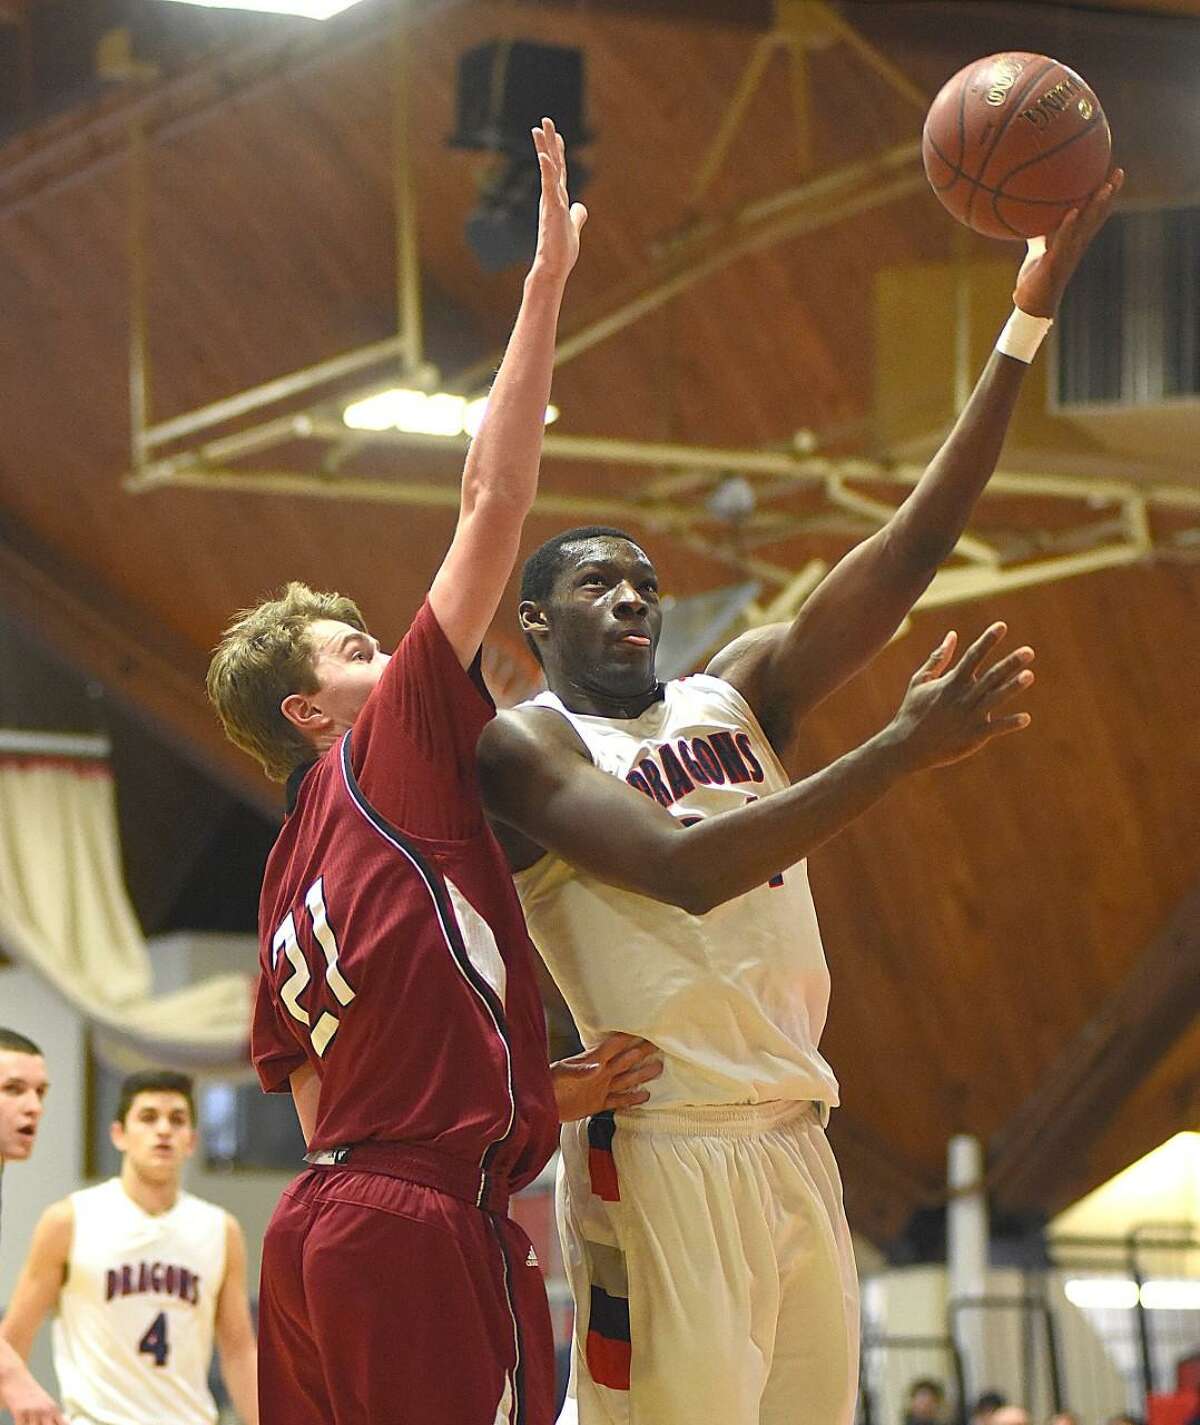 GFA’s Sunday Okeke, right, puts up a shot over St. Luke’s Jackson Selvala during the first half of Sunday’s NEPSAC Class C Championship game at Clark University in Worcester, Mass. St. Luke’s defeated GFA 74-65.